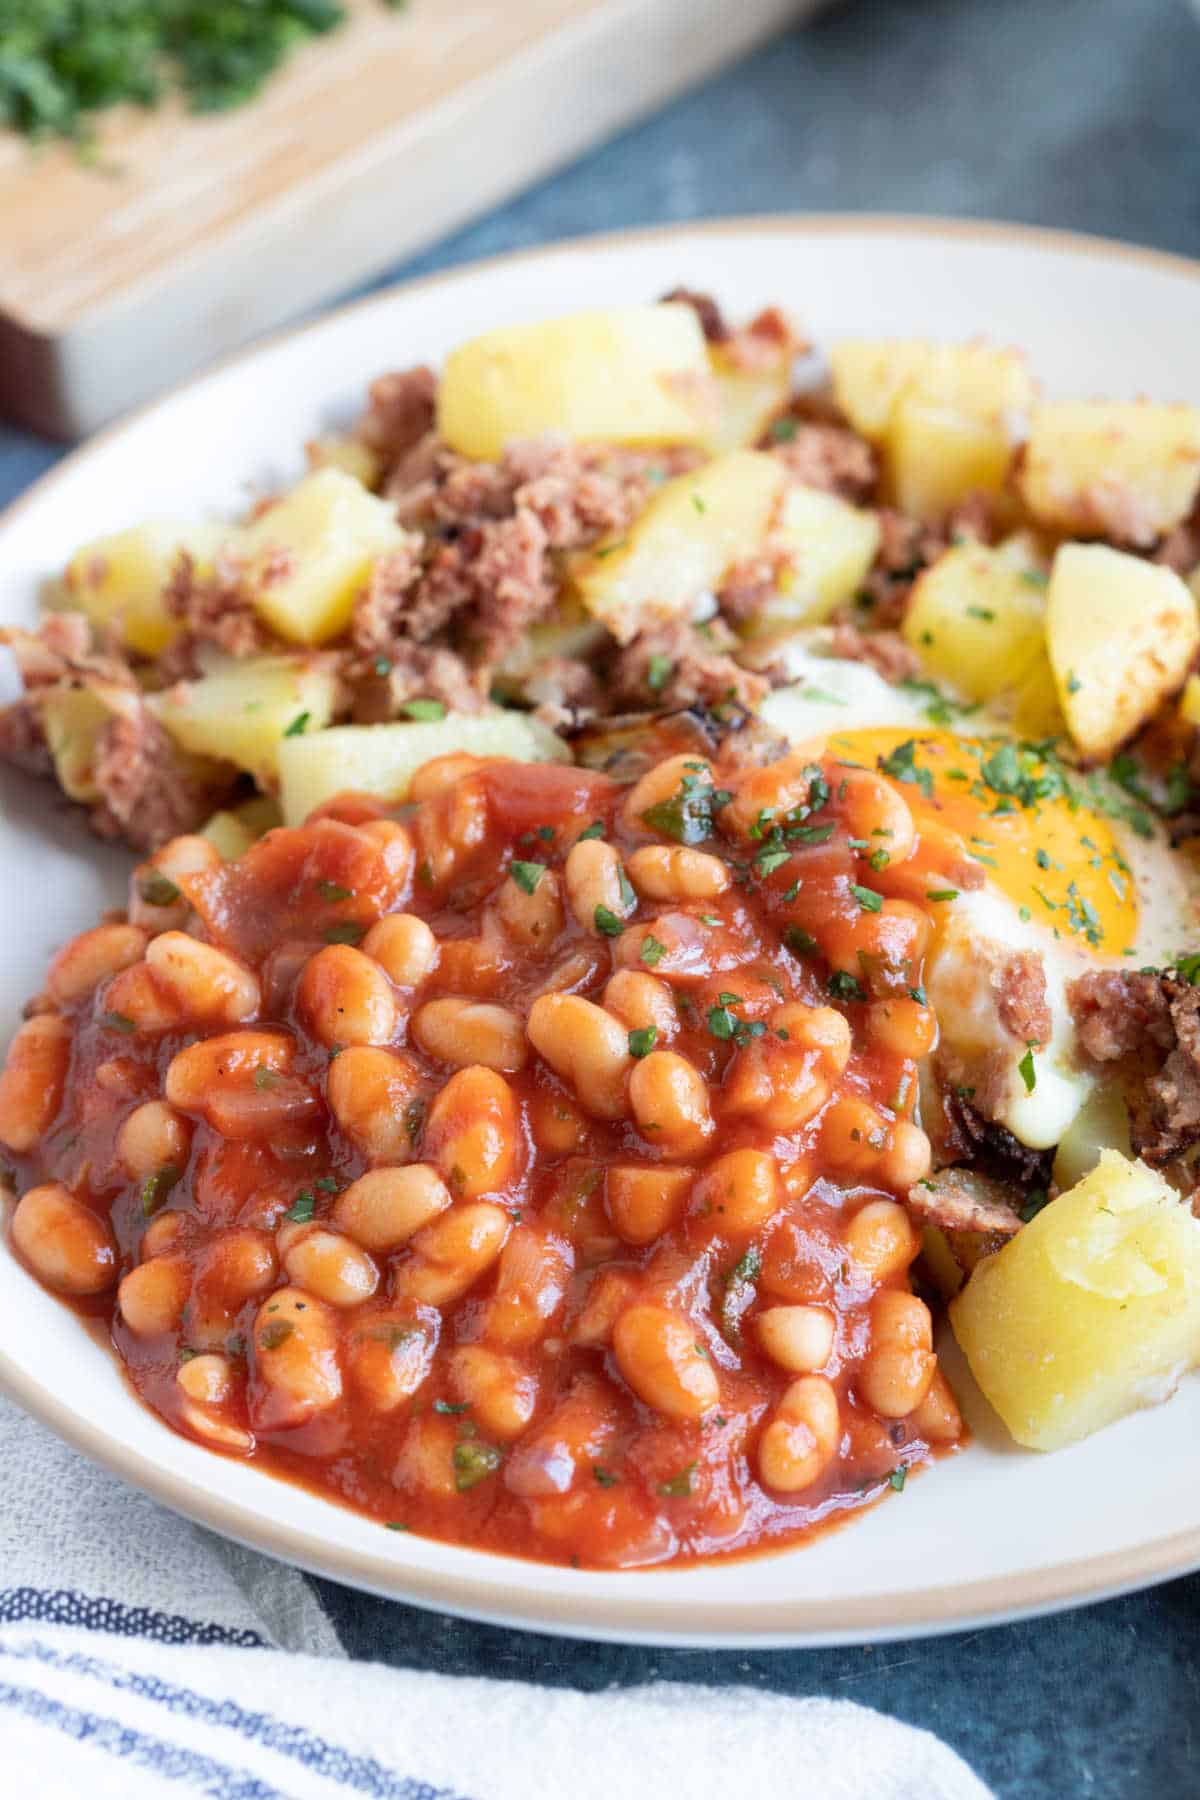 Homemade baked beans served with corned beef hash.